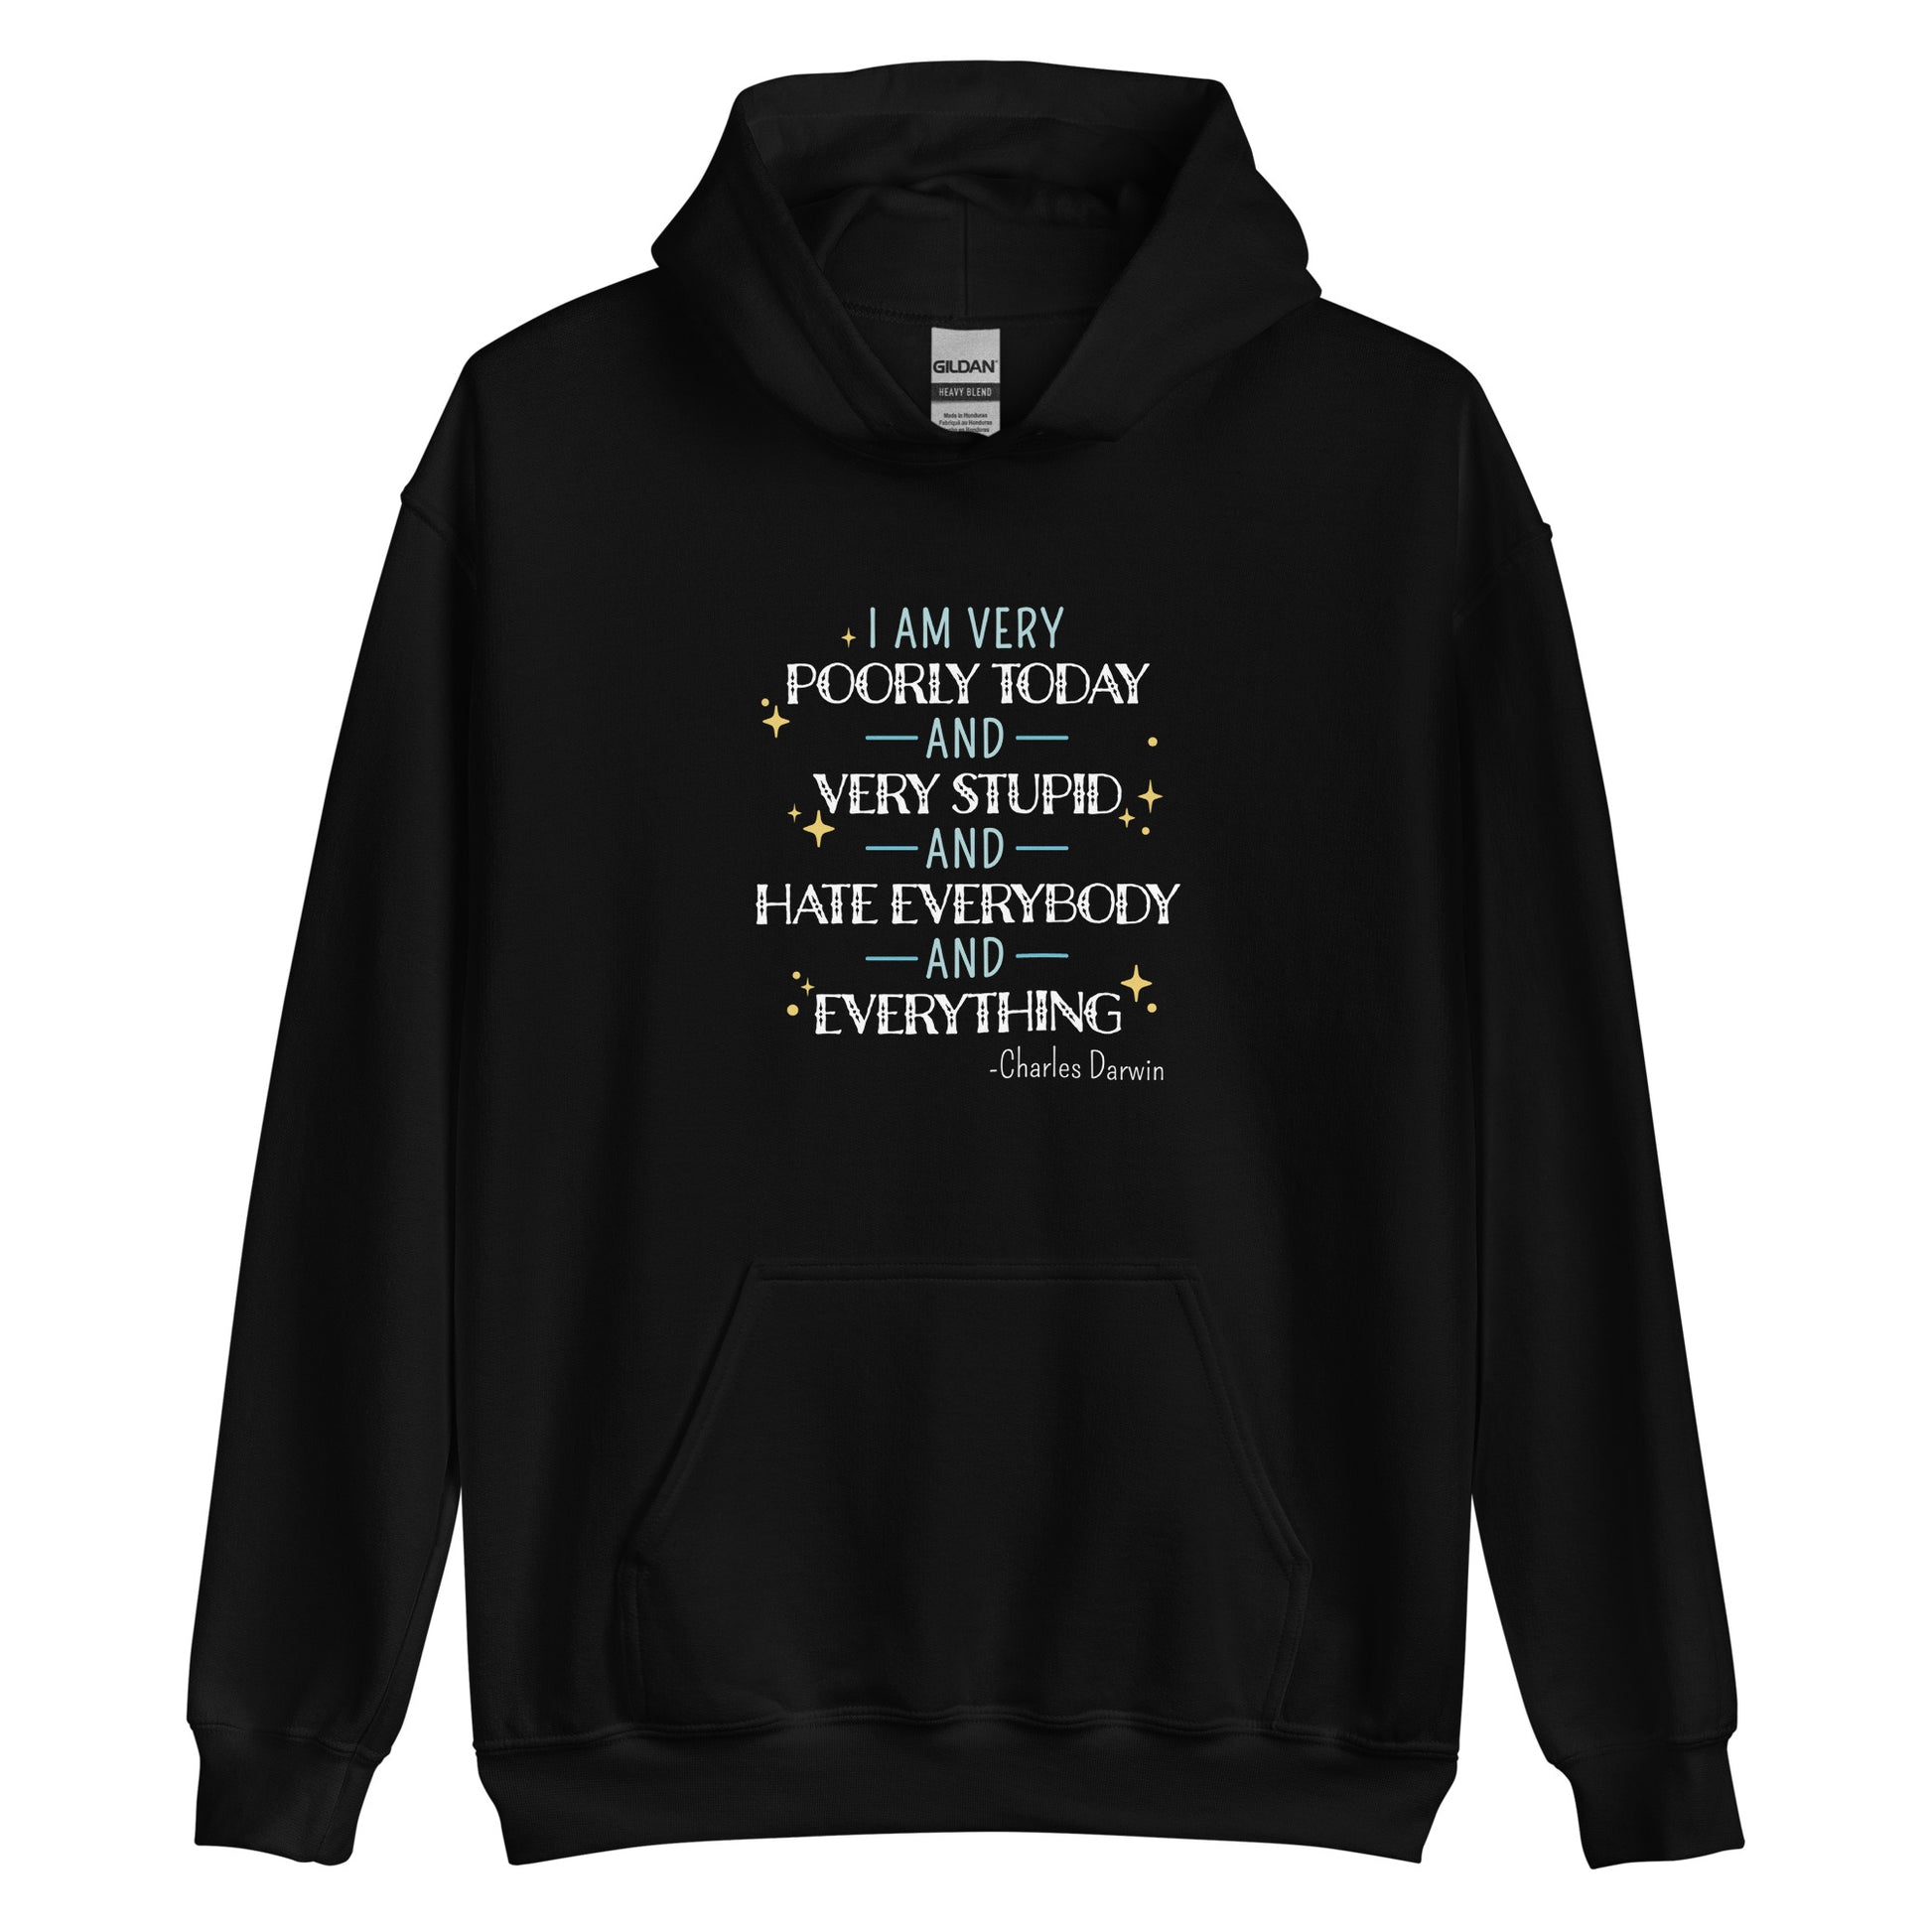 A black hooded sweatshirt featuring a quote from Charles Darwin in white and blue text. The quote reads "I am very poorly today and very stupid and hate everybody and everything".